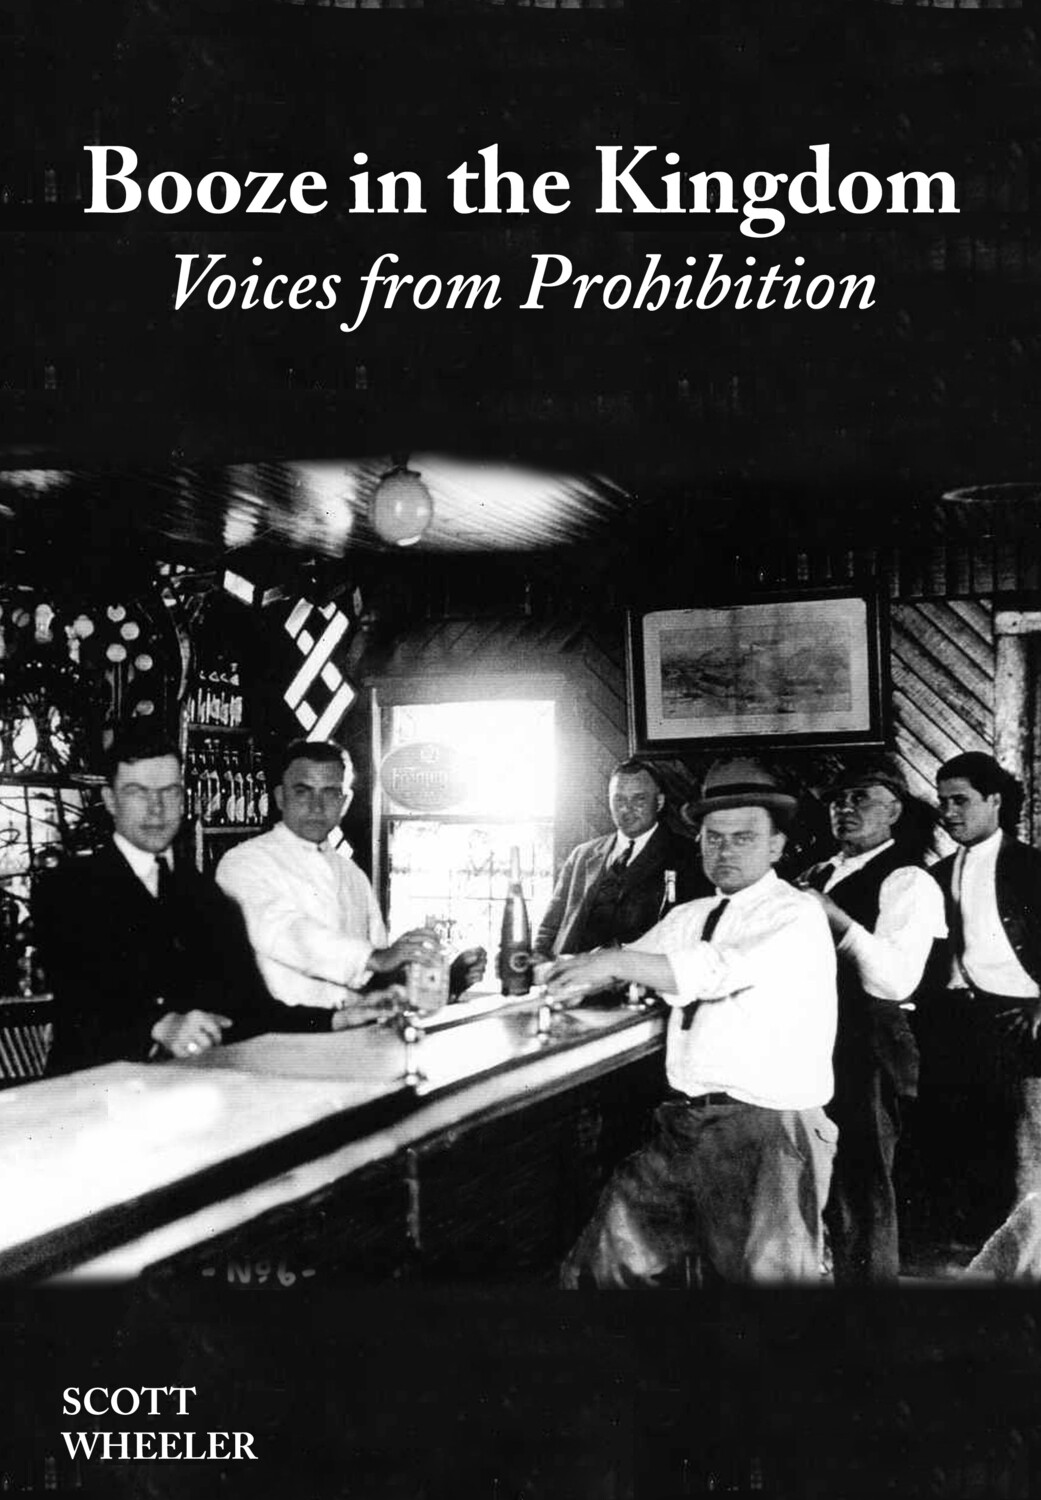 Booze in the Kingdom: Voices from Prohibition